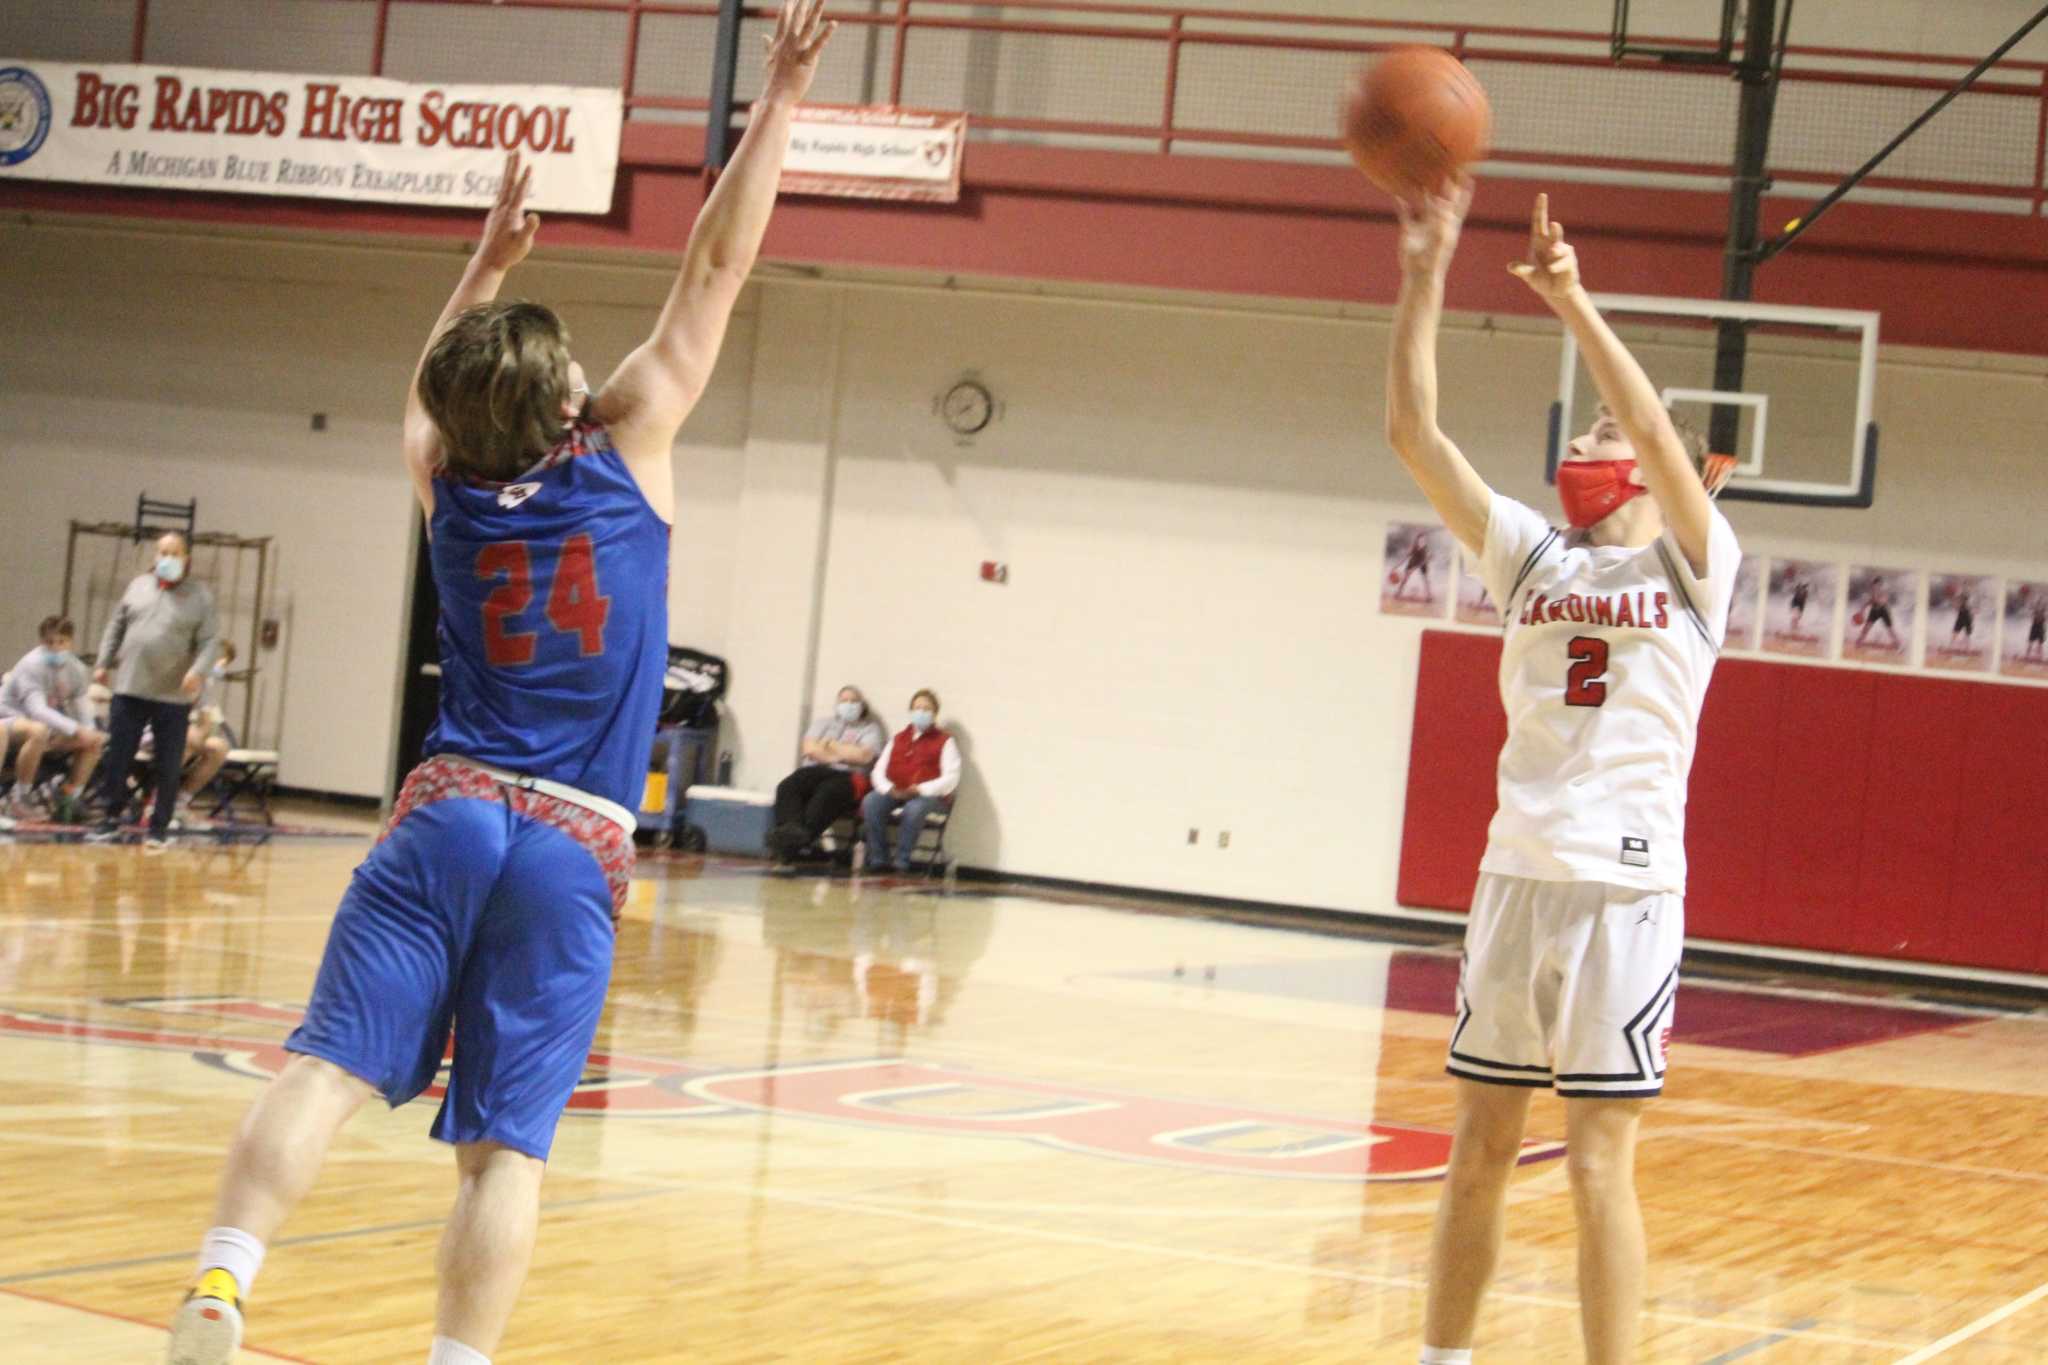 Big Rapids' shooting too much for Warriors